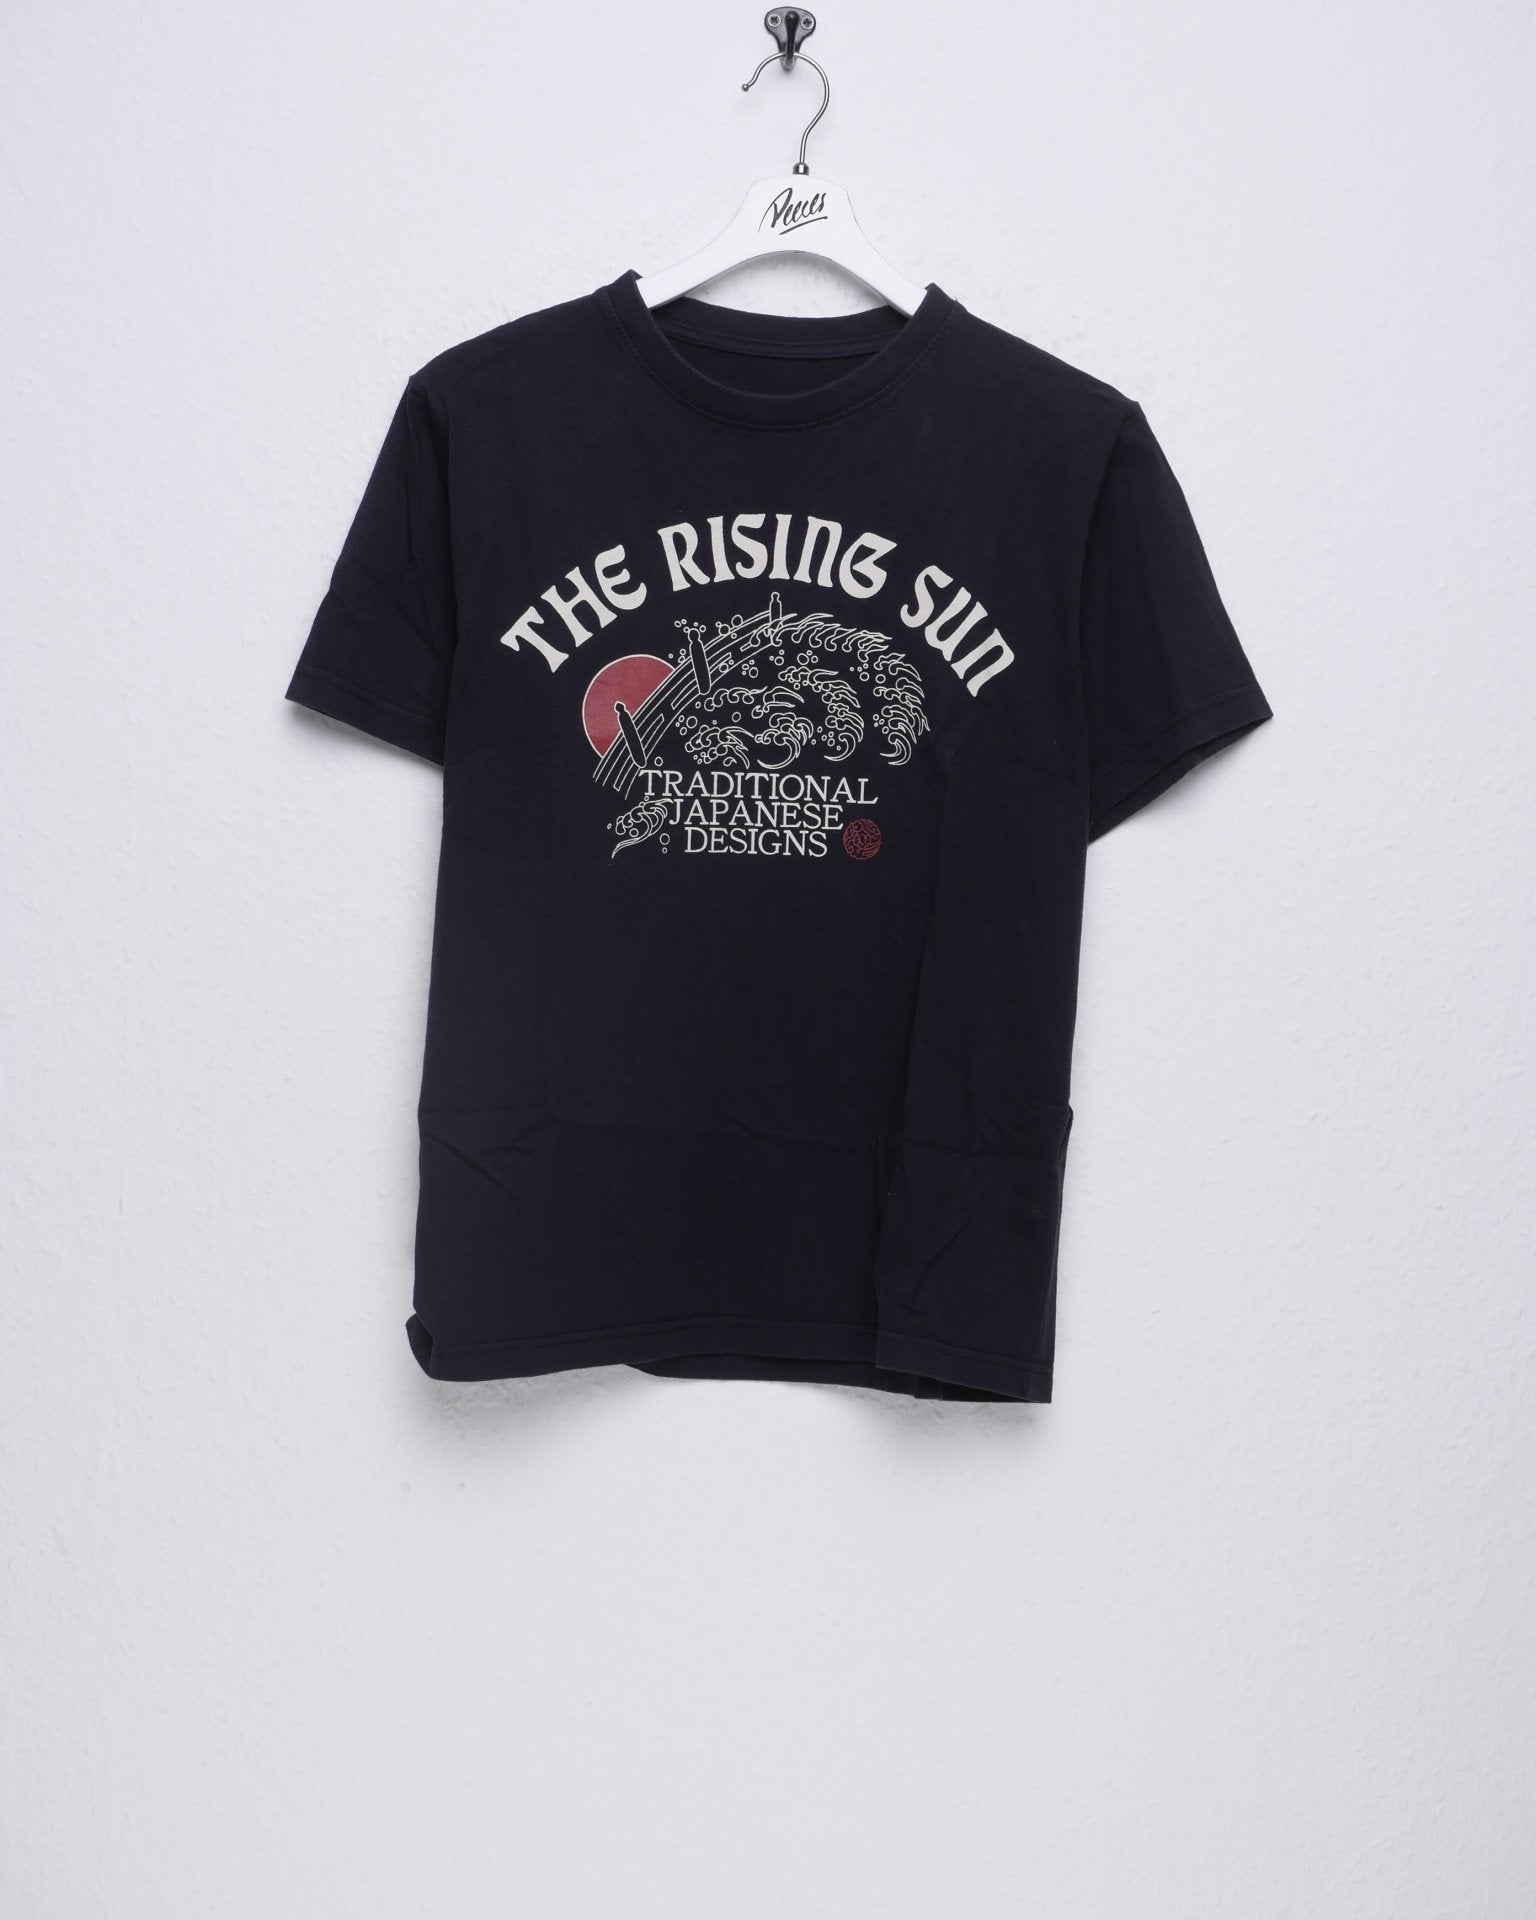 The Rising Sun printed Graphic Vintage Shirt - Peeces